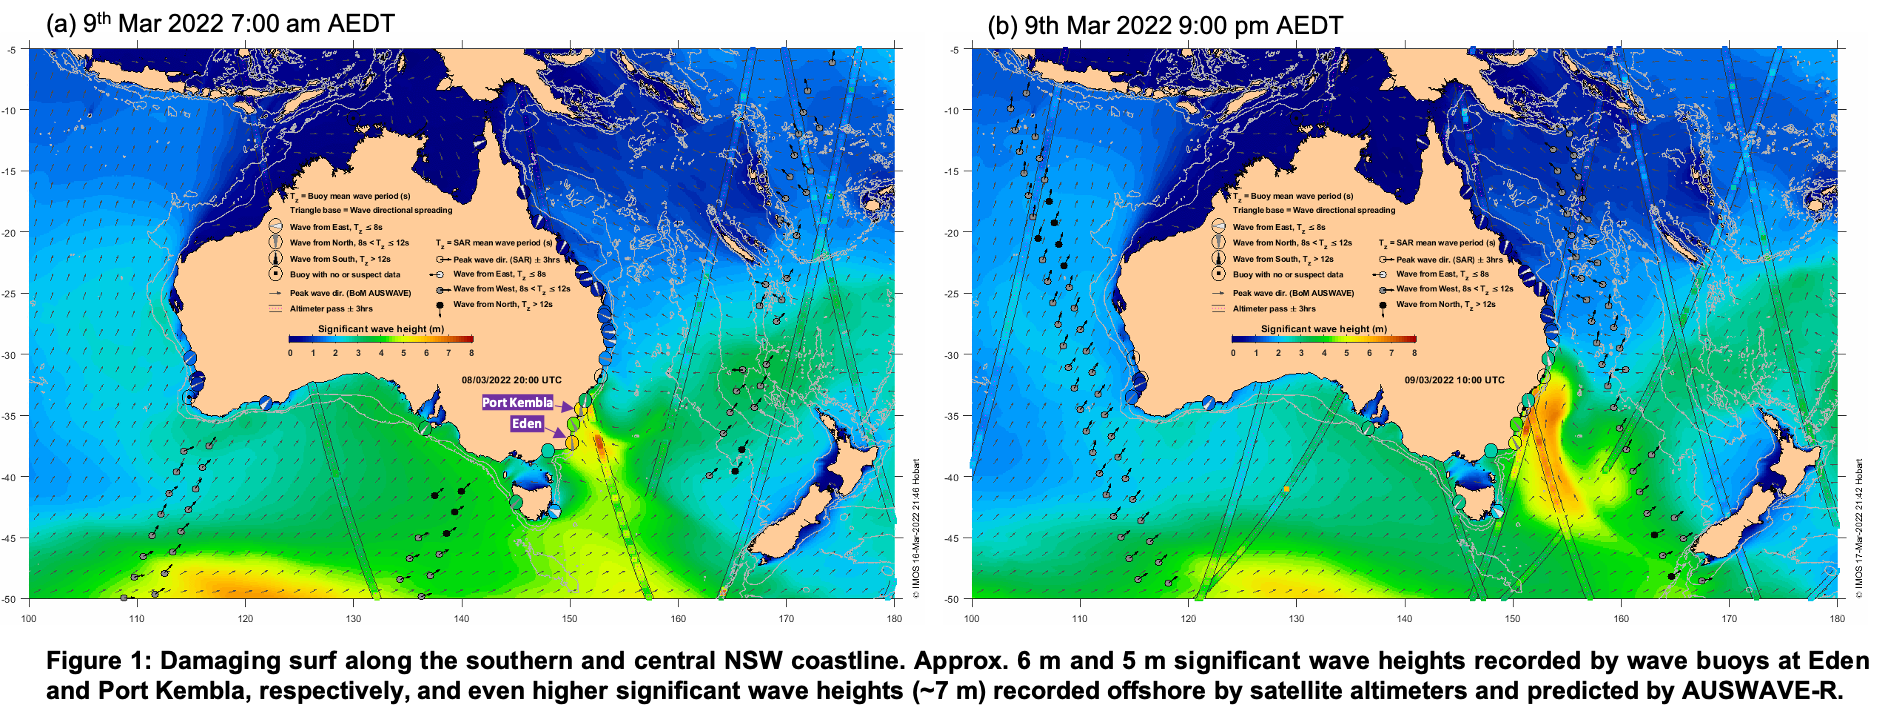 New surface waves product added to IMOS OceanCurrent